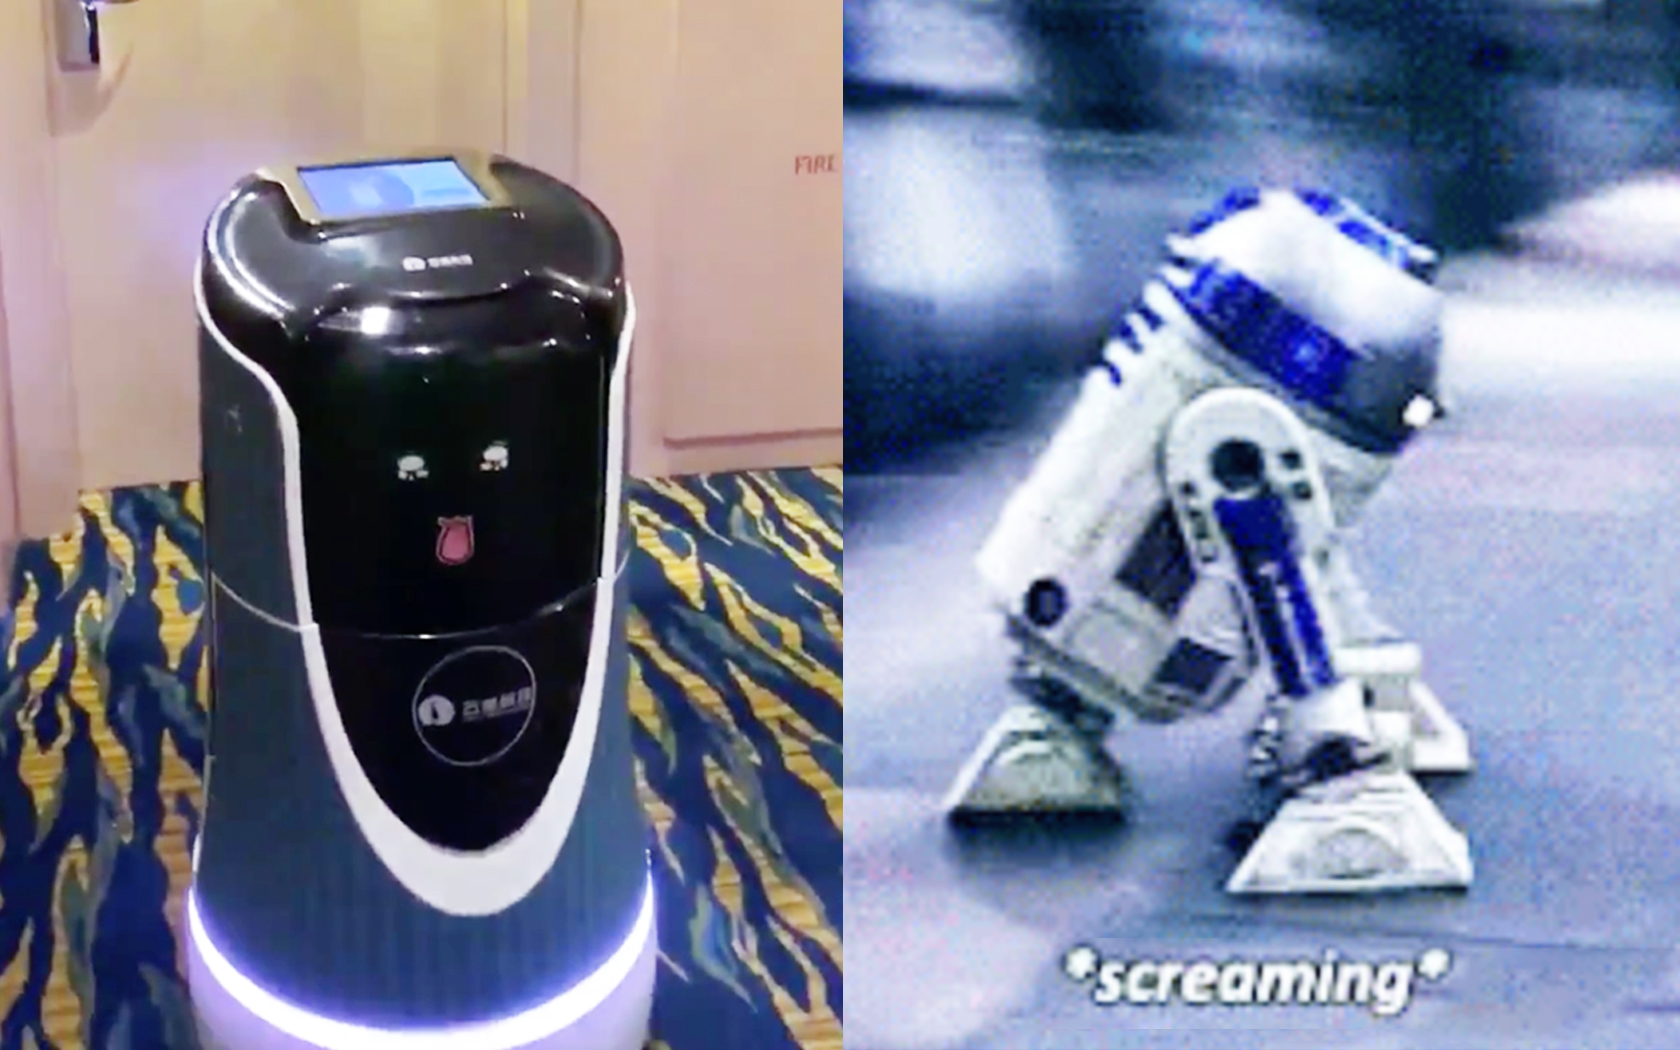 Room Service Robot: All The Best Reactions To This Cute Robot Butler